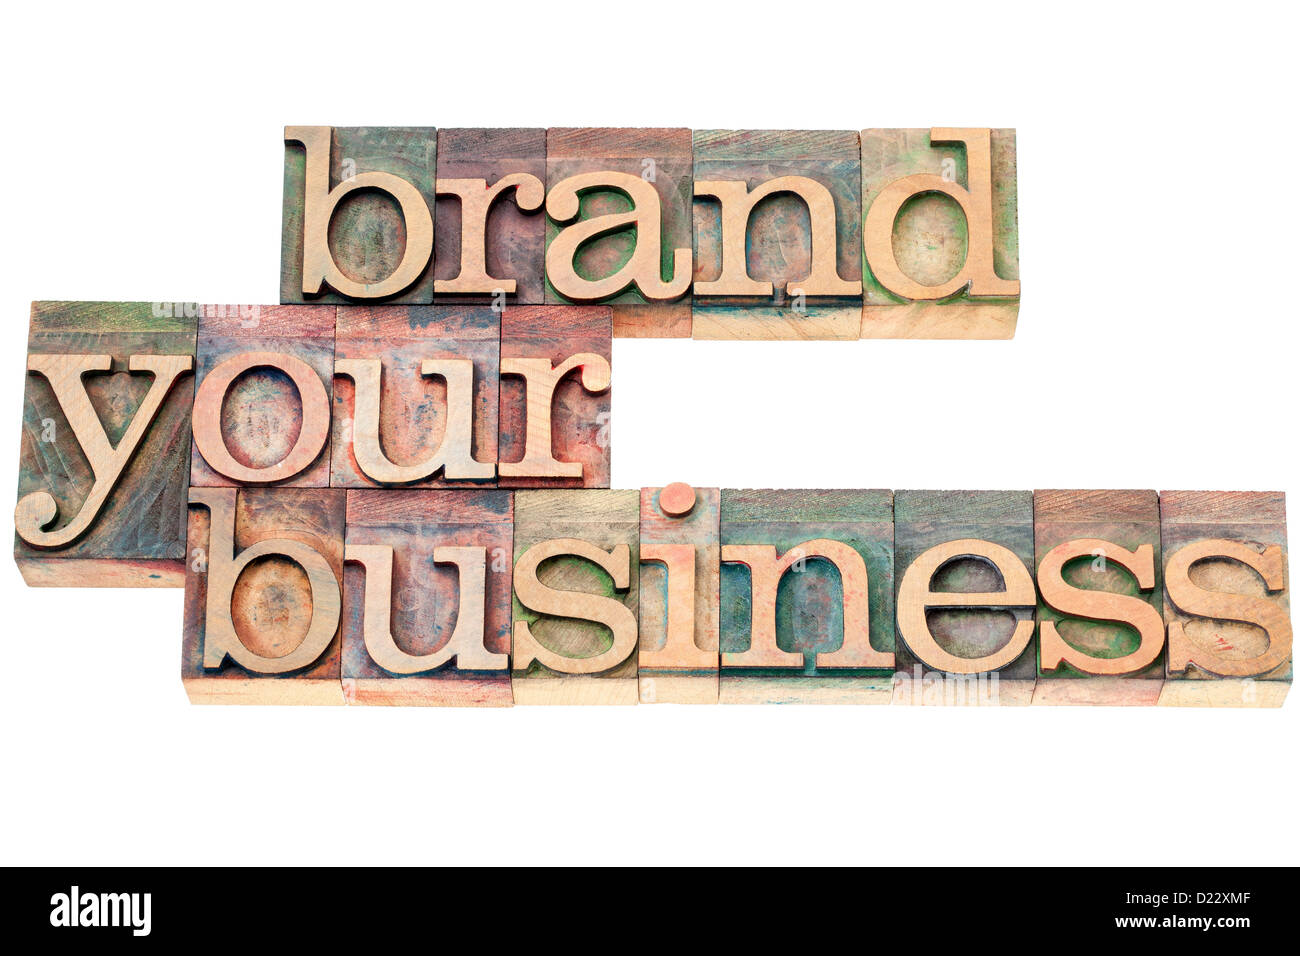 brand your business - marketing concept - isolated text in vintage letterpress wood type printing blocks Stock Photo